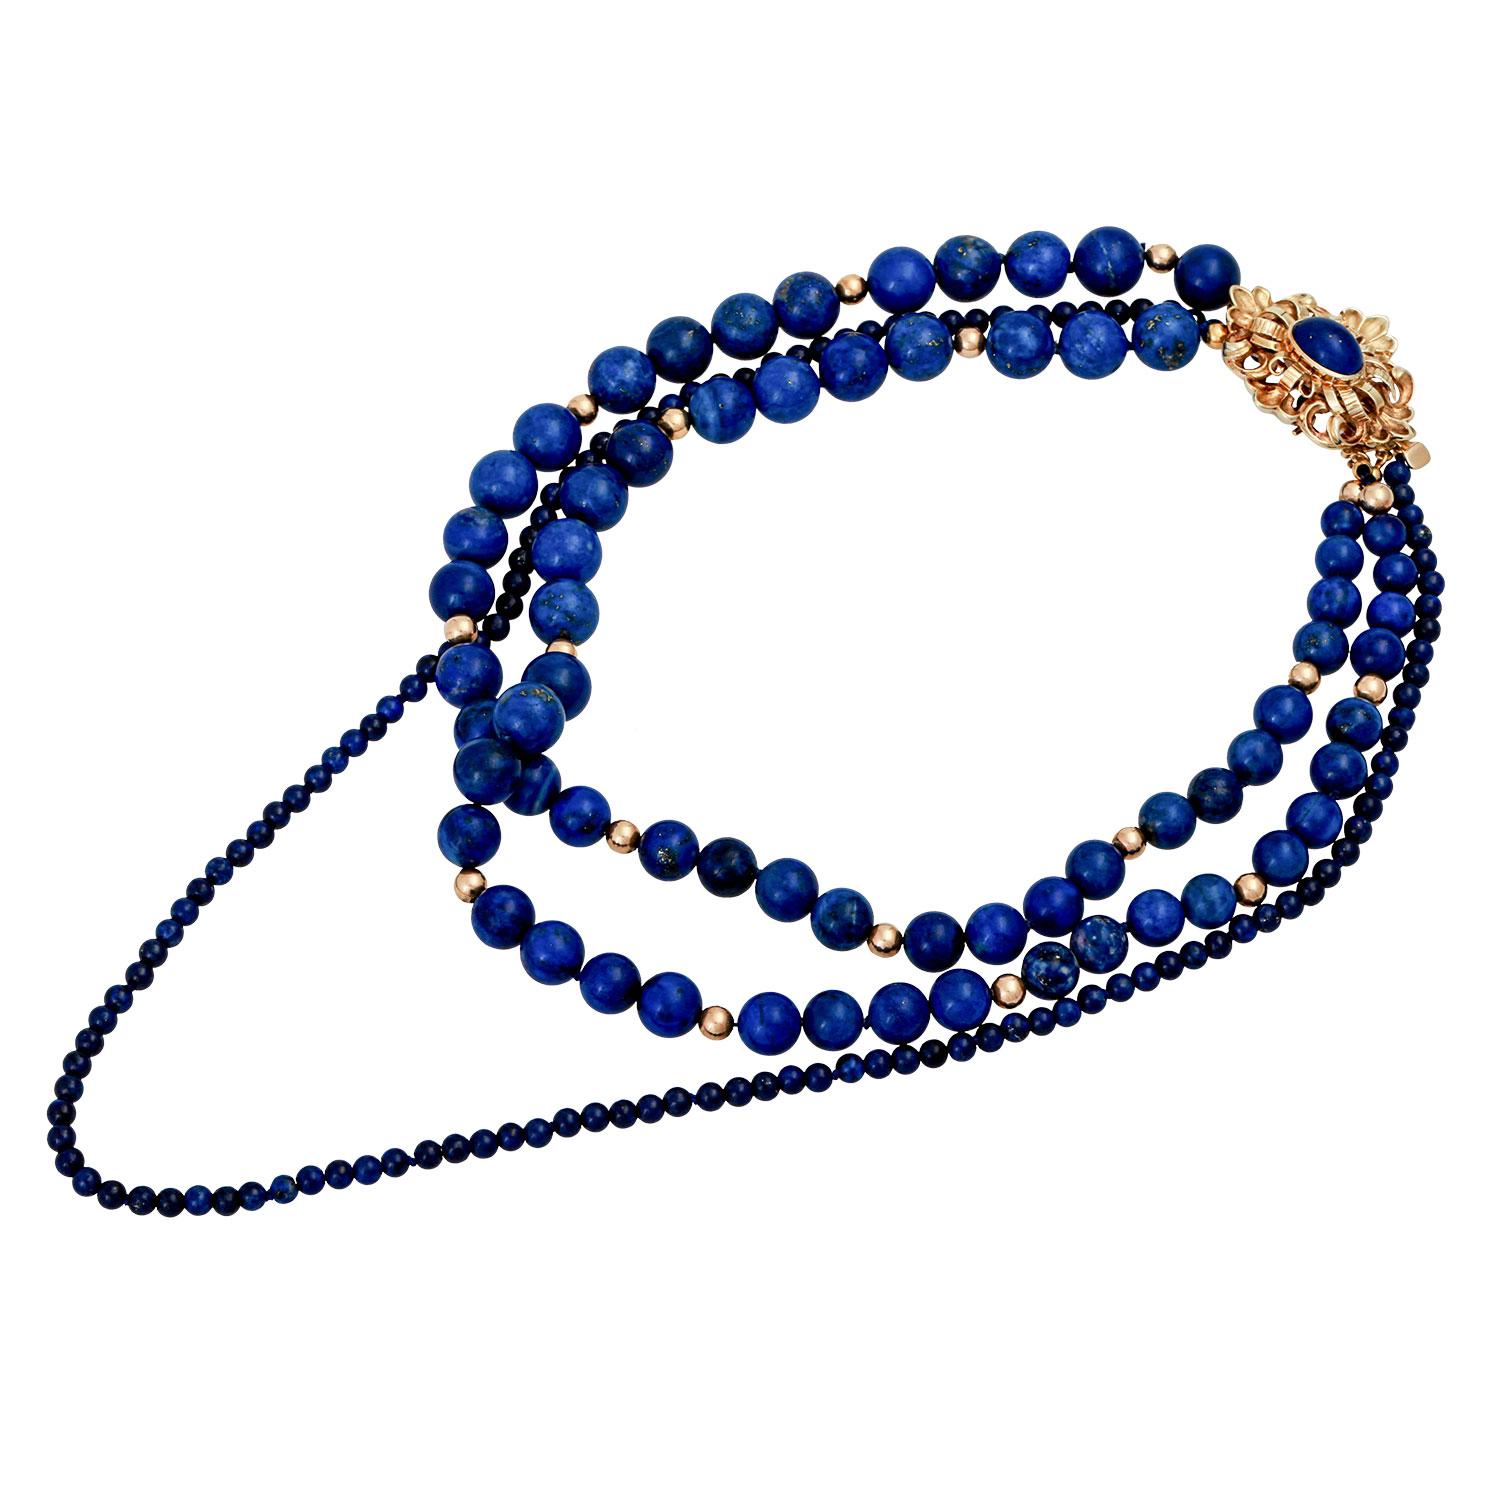 Modern Lapis Lazuli Necklace, 3 Rows For Sale